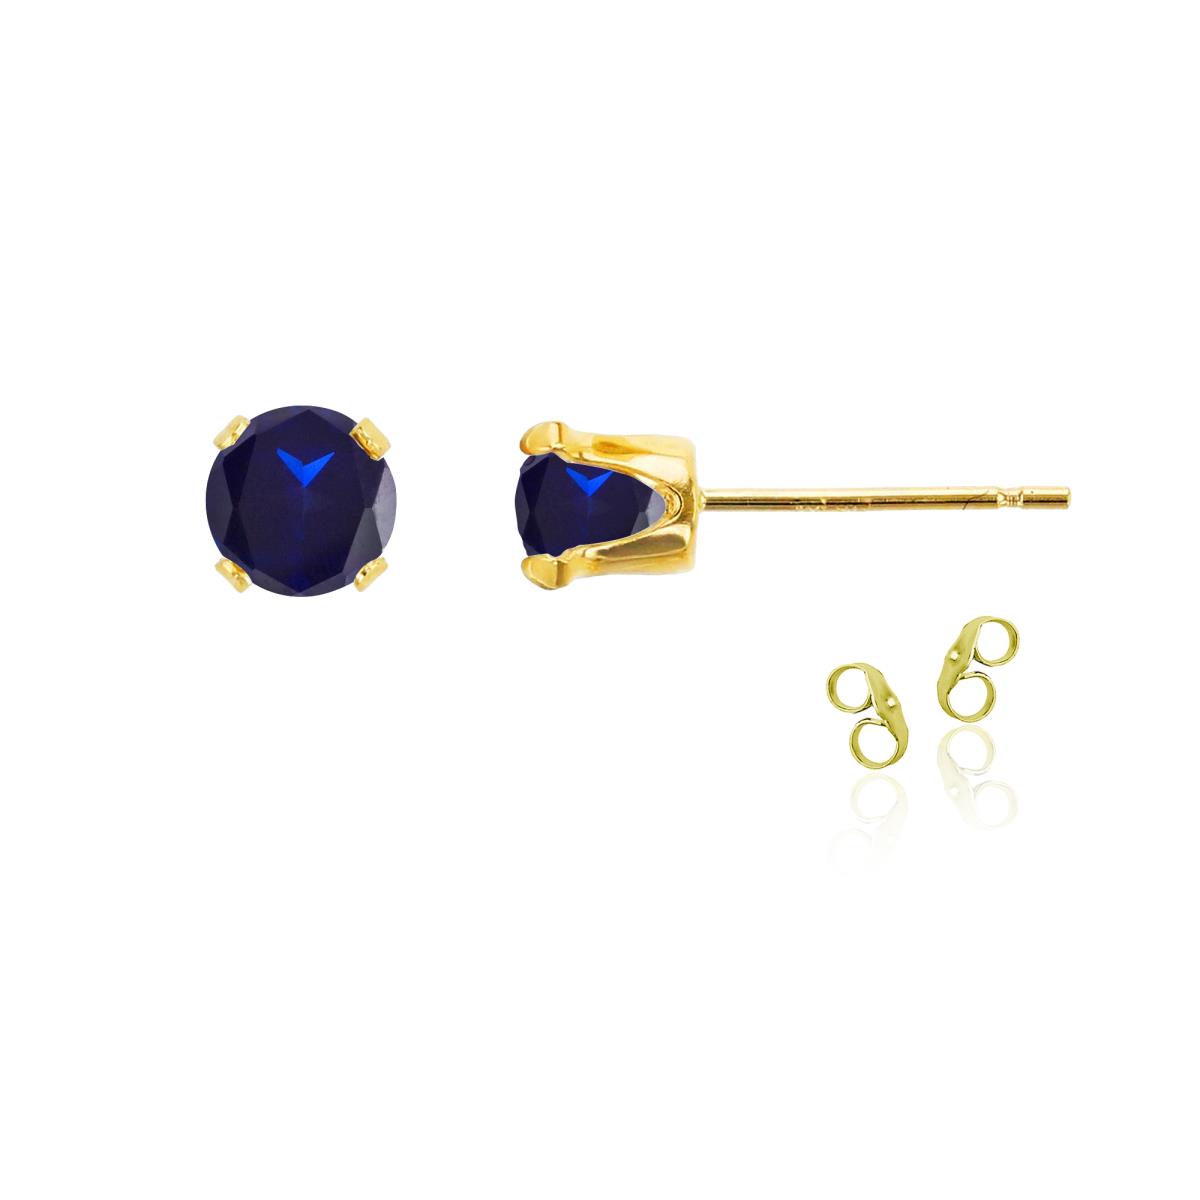 Sterling Silver Yellow 7mm Round Cr Blue Sapphire Stud Earring with Clutch